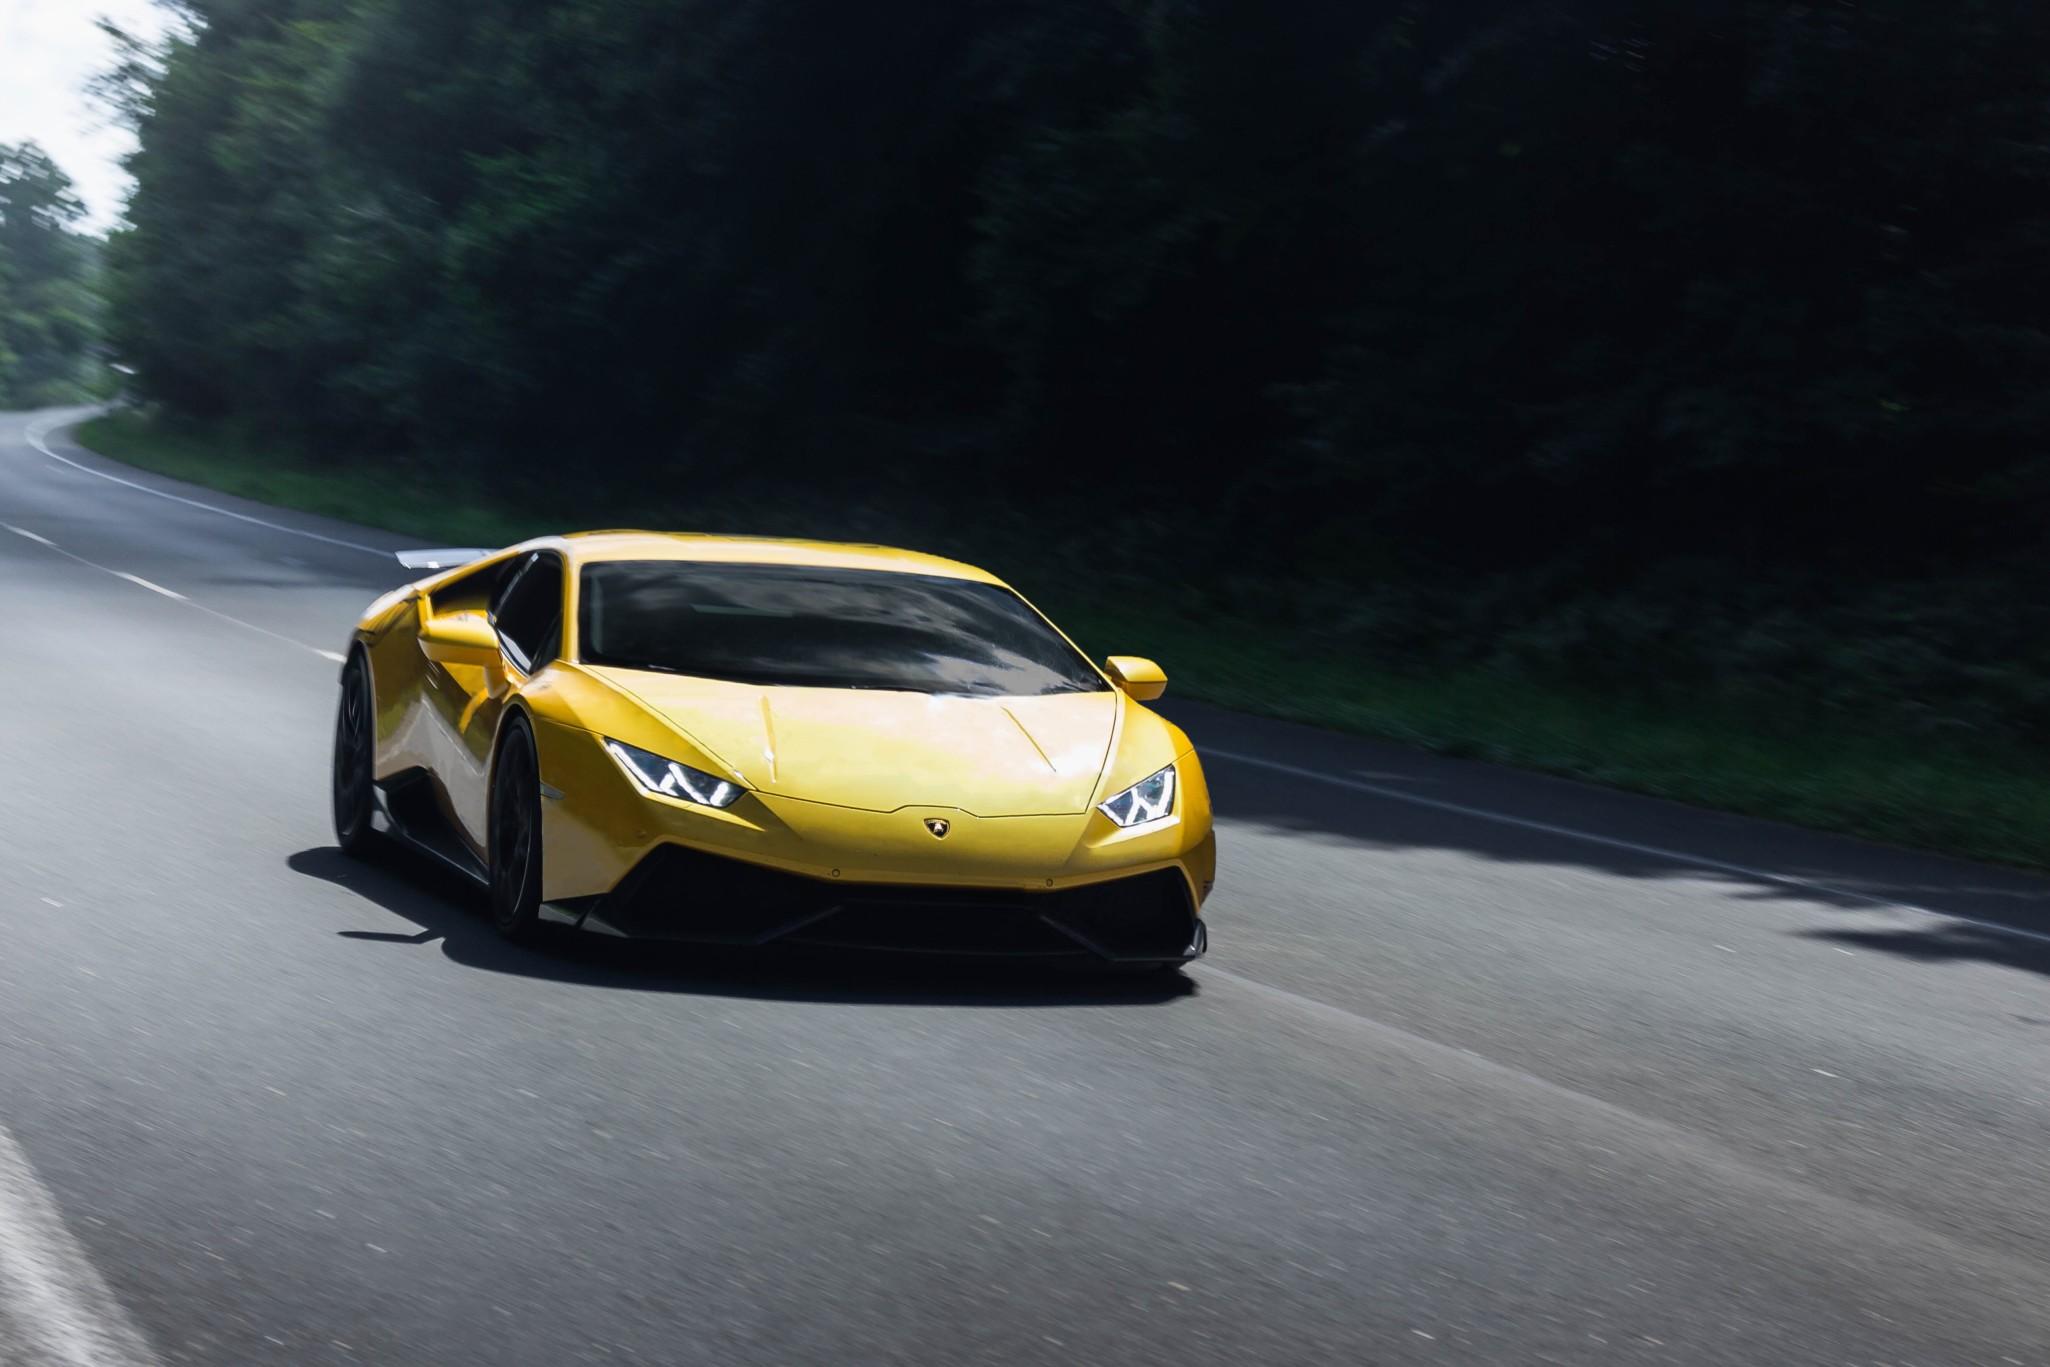 The Lamborghini Huracán can be taken off-road with some heavy modifications.